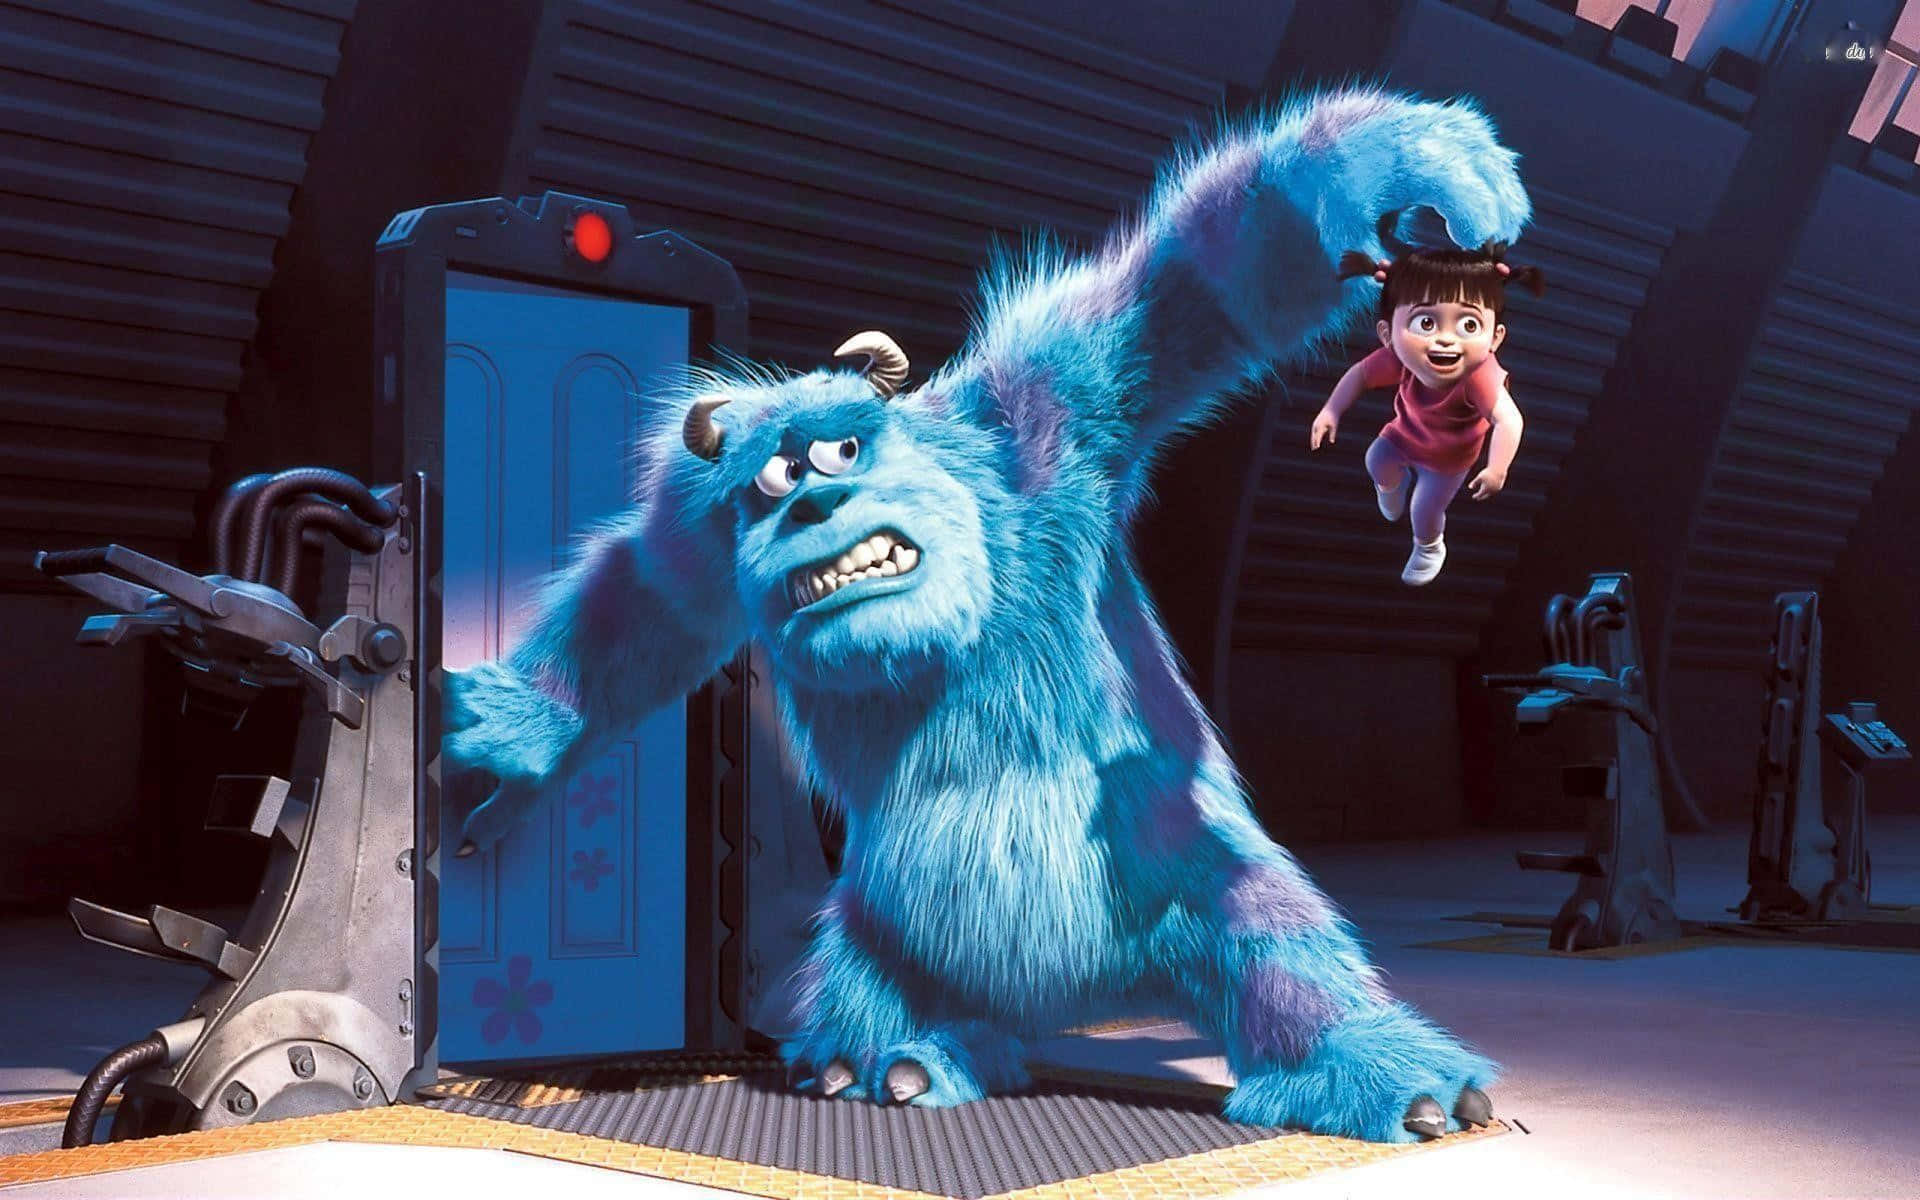 Sulley, Mike and Boo have a Laugh at Monsters Inc.